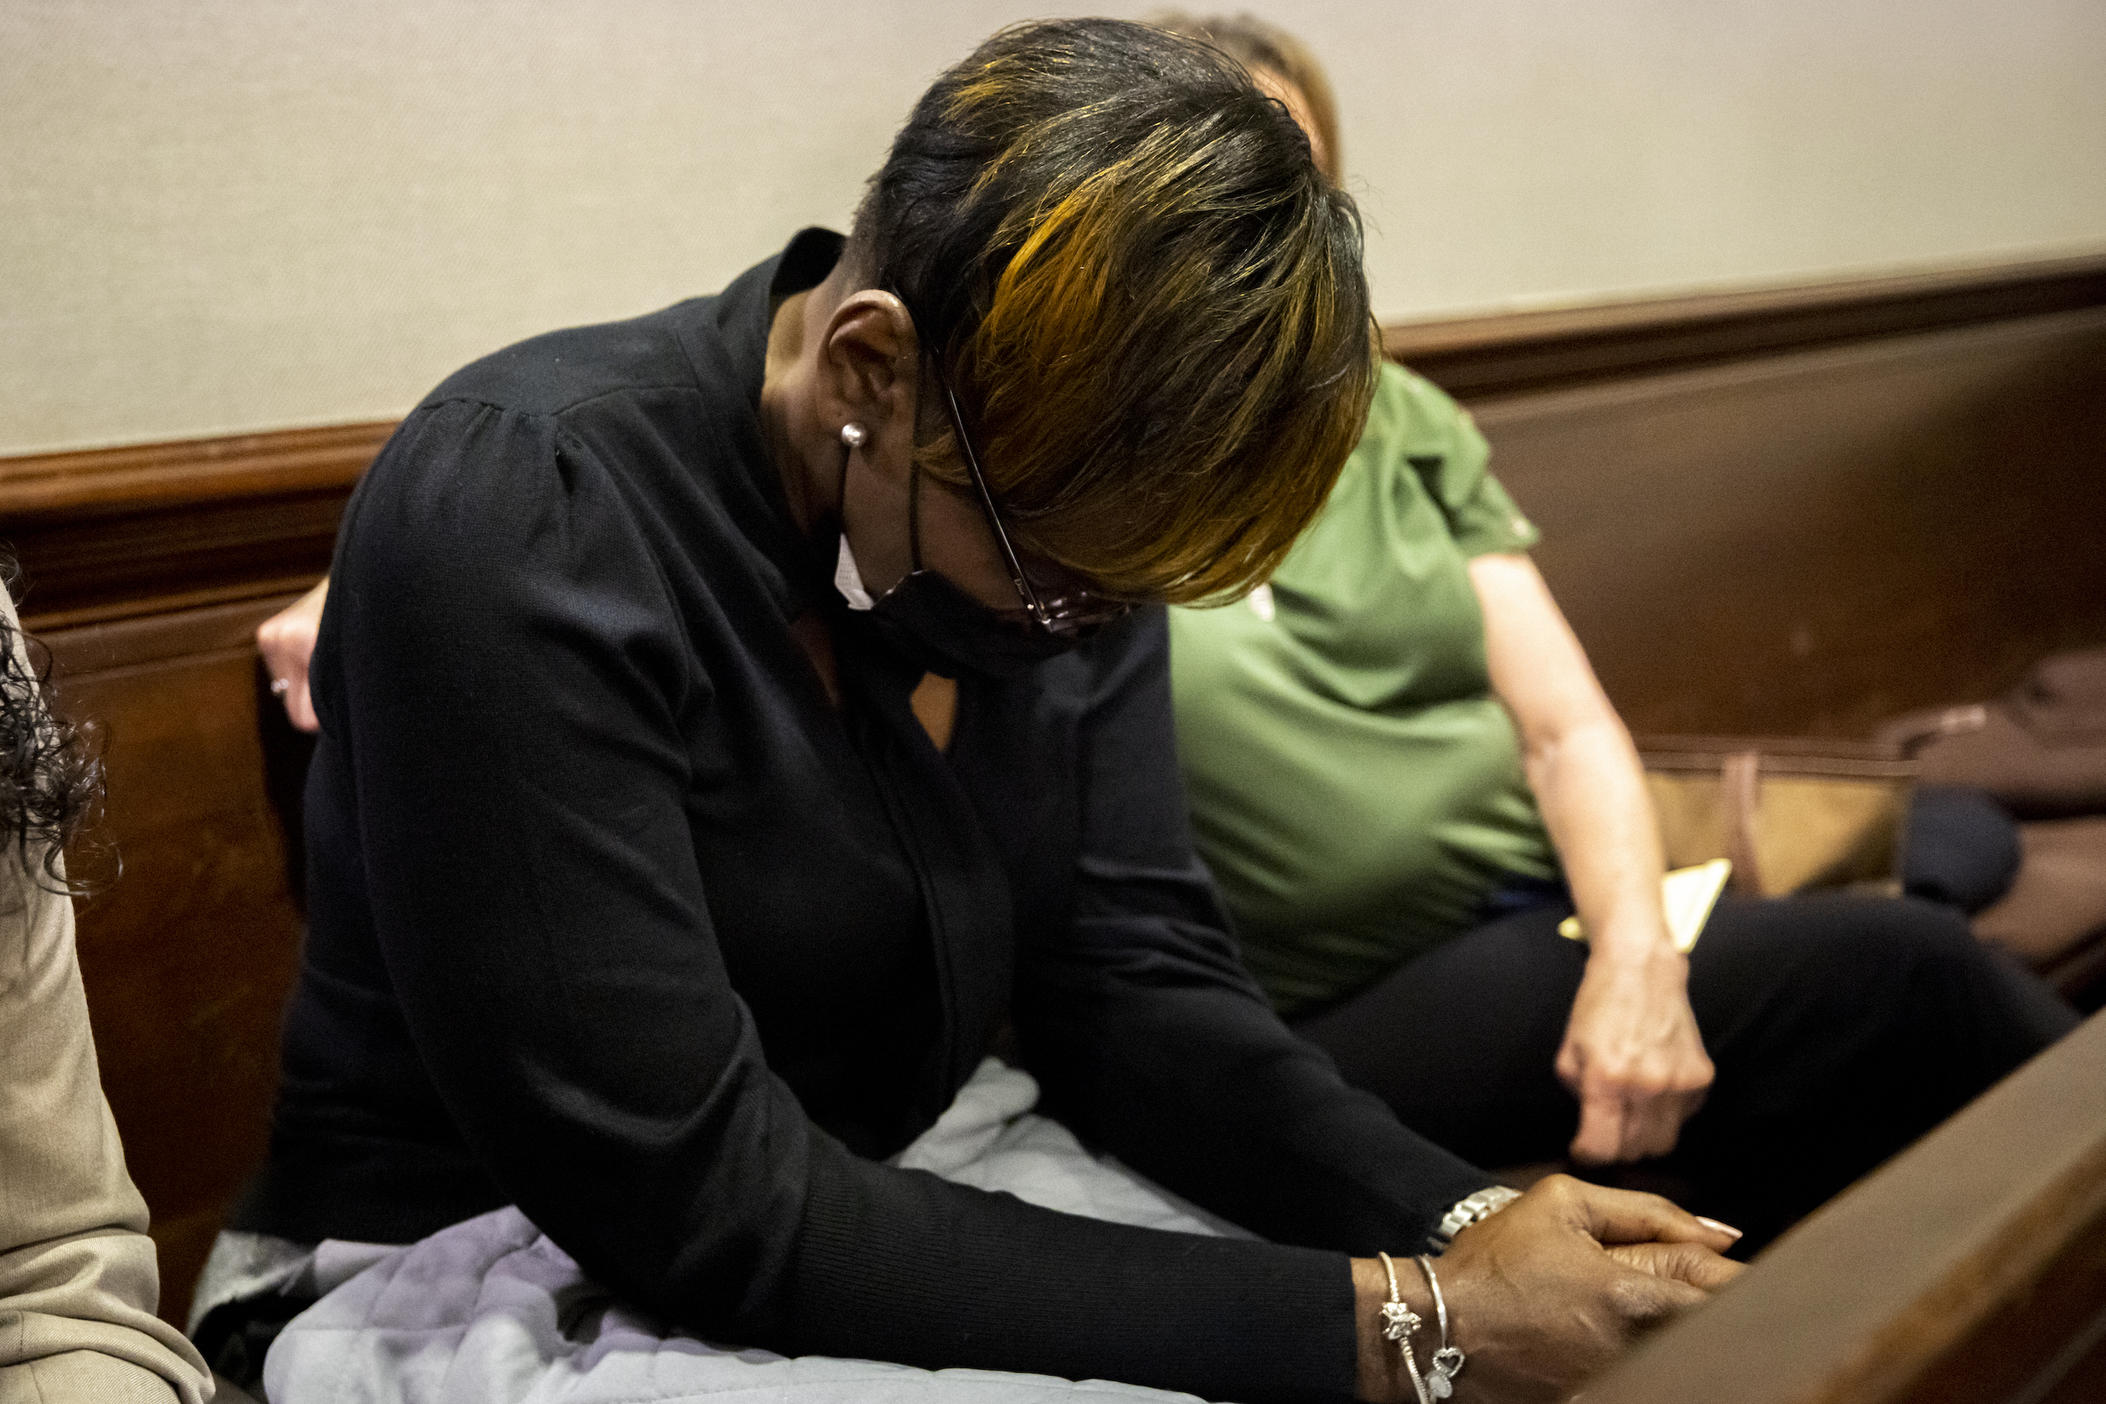 Ahmaud Arbery's mother Wanda Cooper-Jones reacts to autopsy photos entered into evidence during the trial of Greg McMichael and his son, Travis McMichael, and a neighbor, William "Roddie" Bryan in the Glynn County Courthouse, Tuesday, Nov. 16, 2021, in Brunswick, Ga.